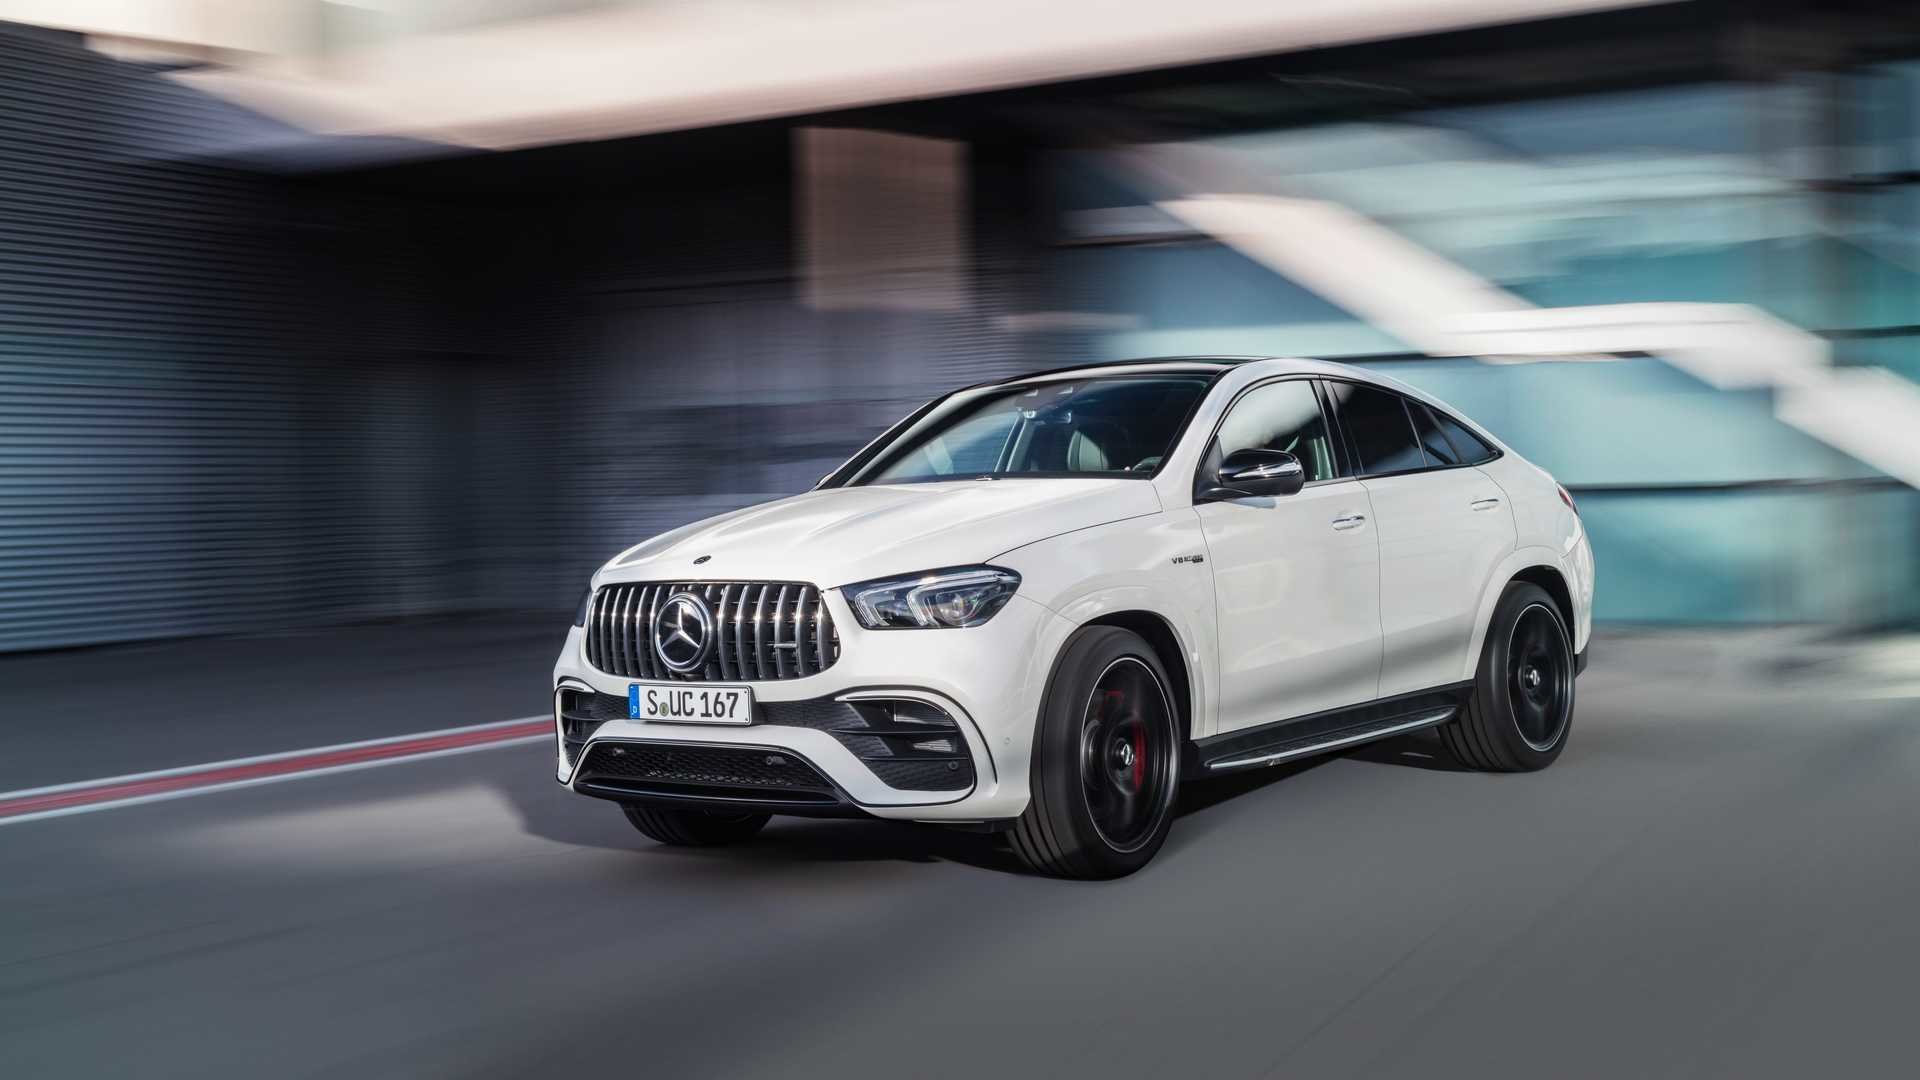 Mercedes-AMG GLE 63s Coupe